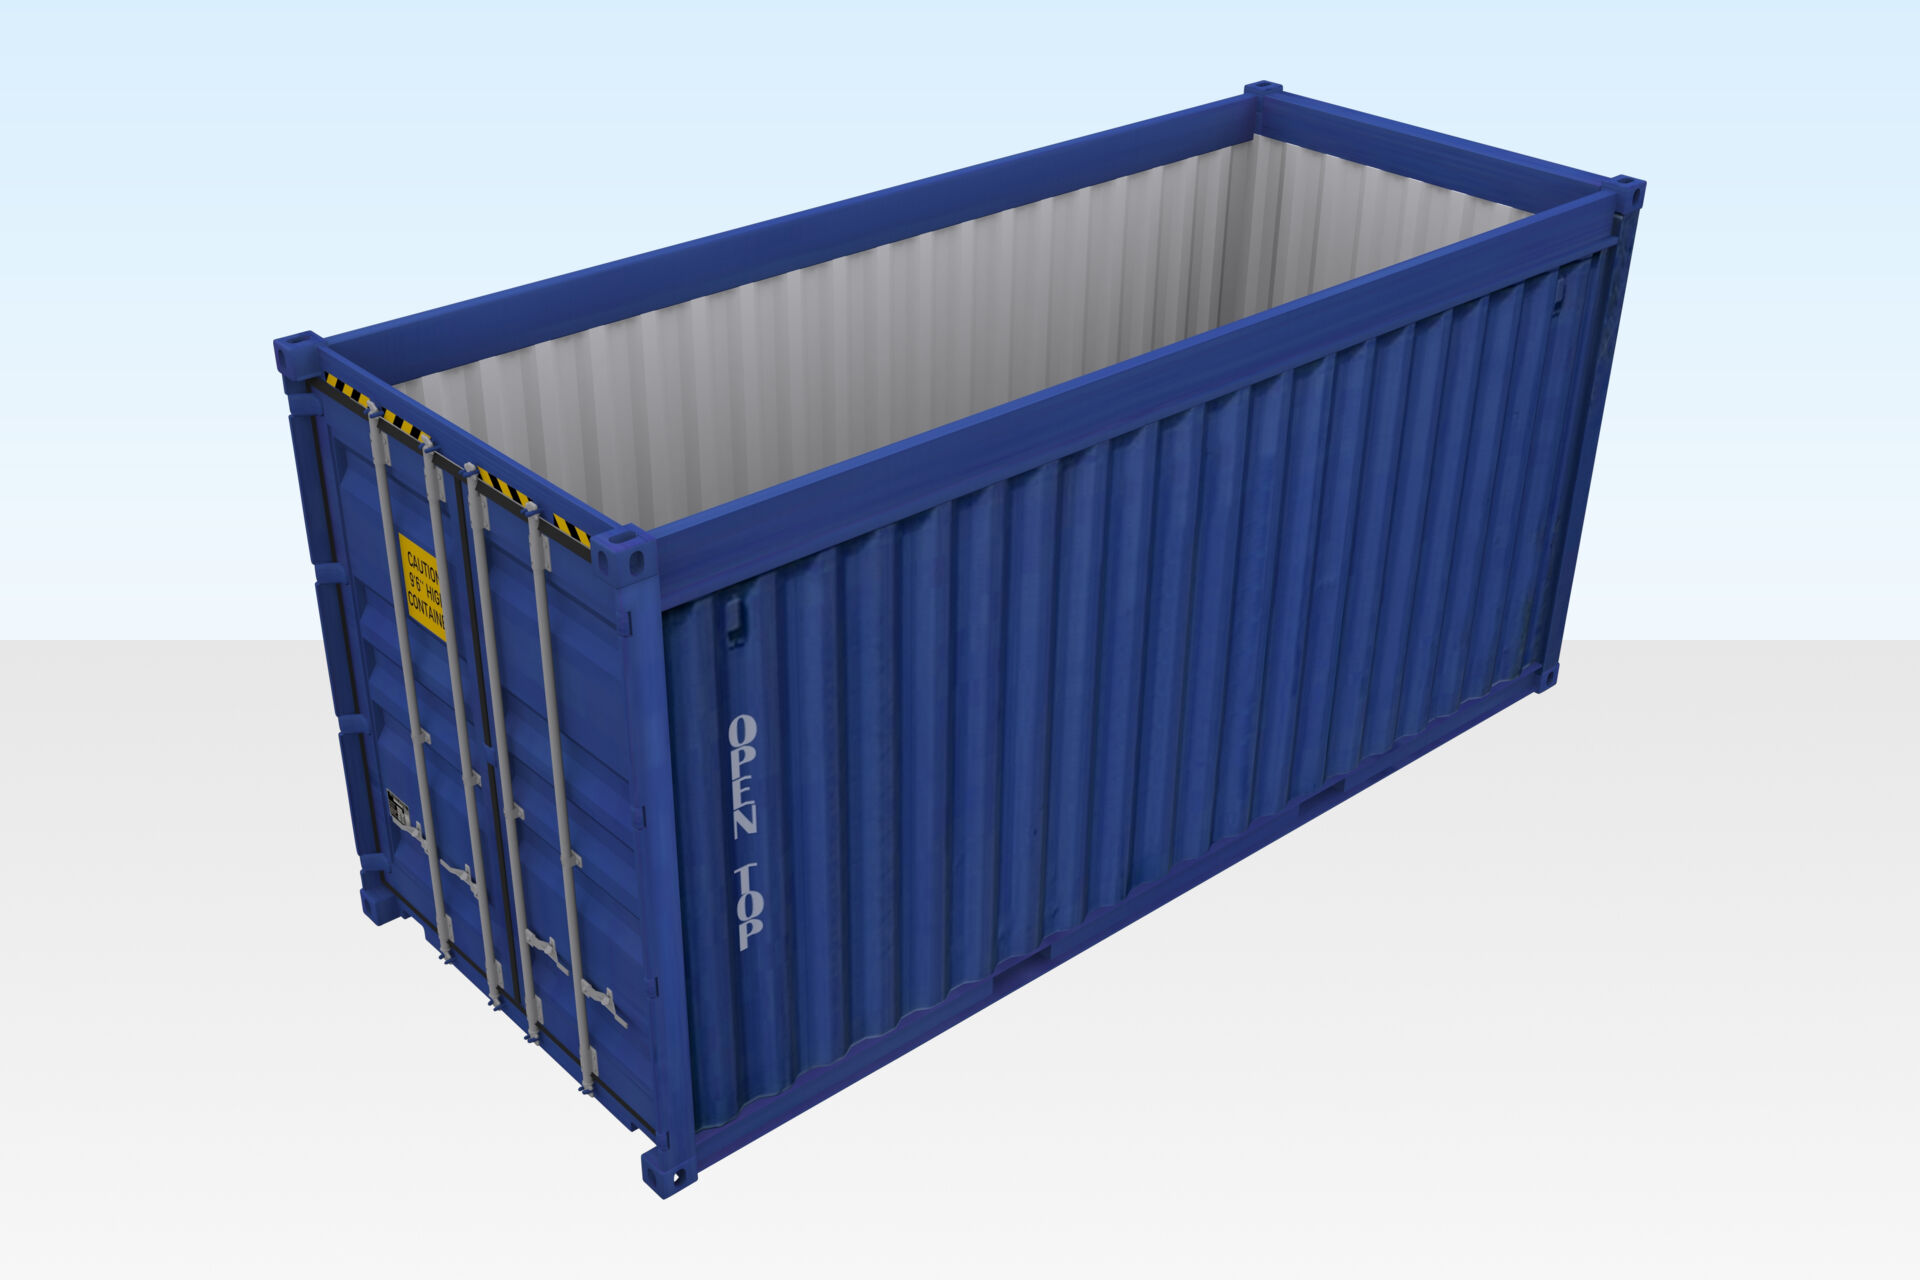 BUY 20FT X 8FT USED SHIPPING CONTAINER – OPEN-TOP AT WWW.CONTAINERS.COM